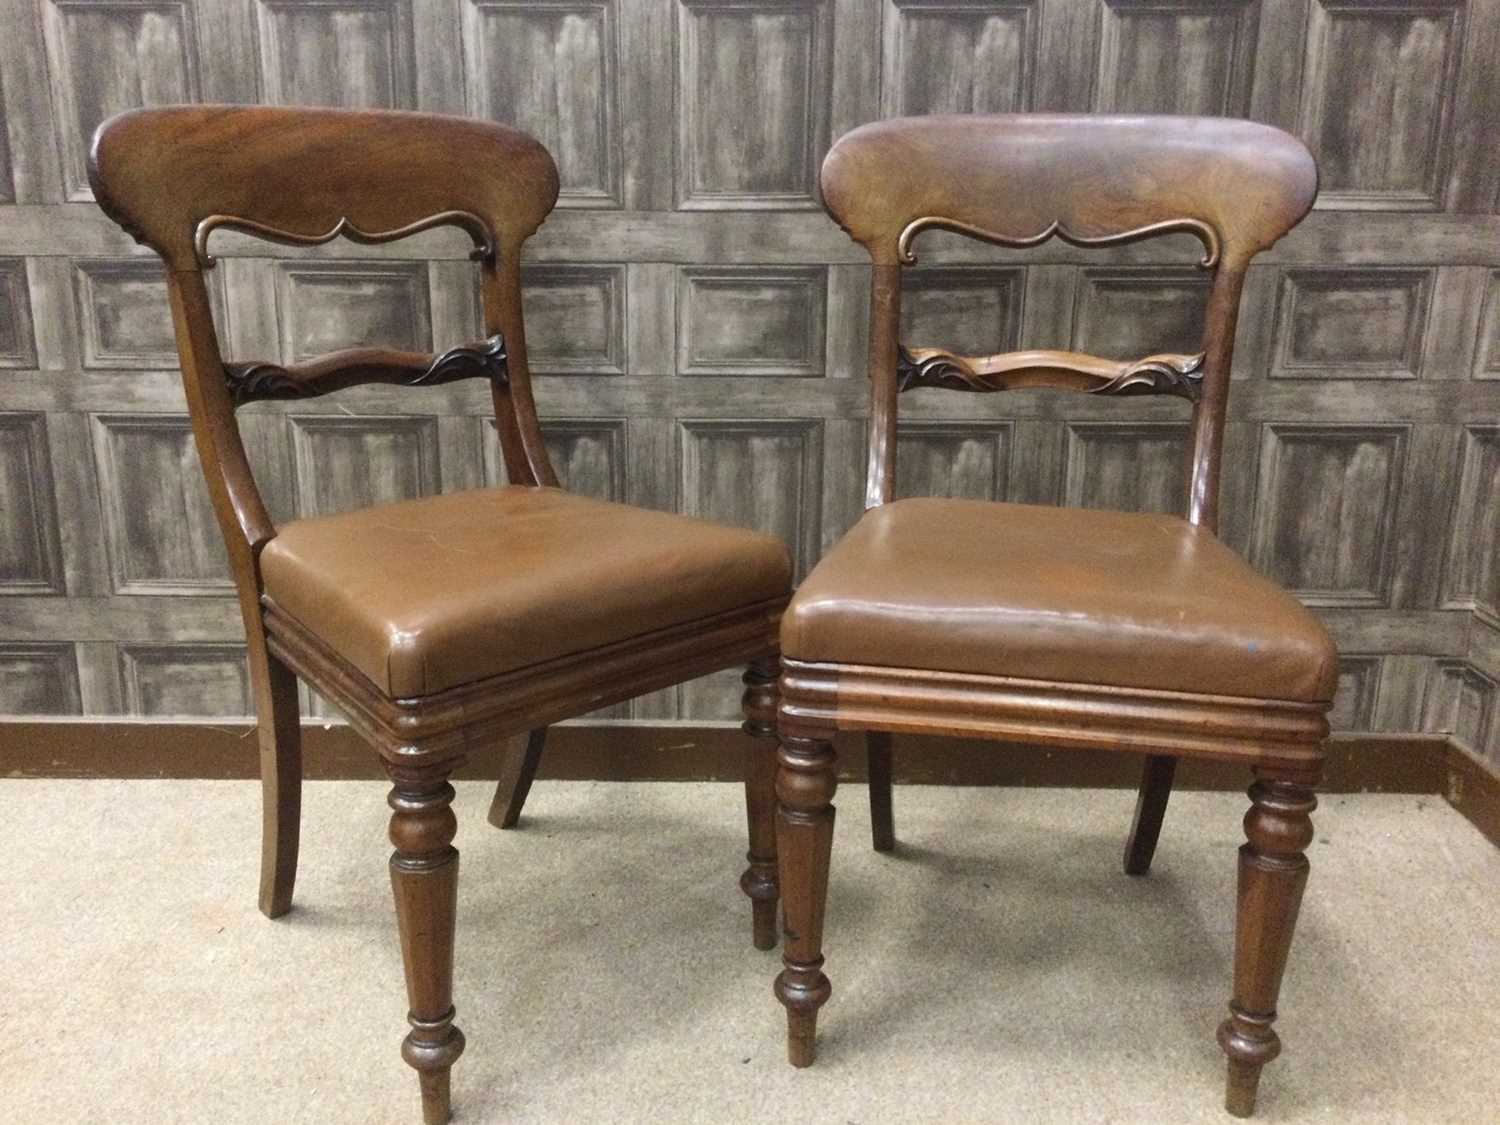 Lot 1656 - A SET OF FOUR EARLY VICTORIAN MAHOGANY DINING CHAIRS